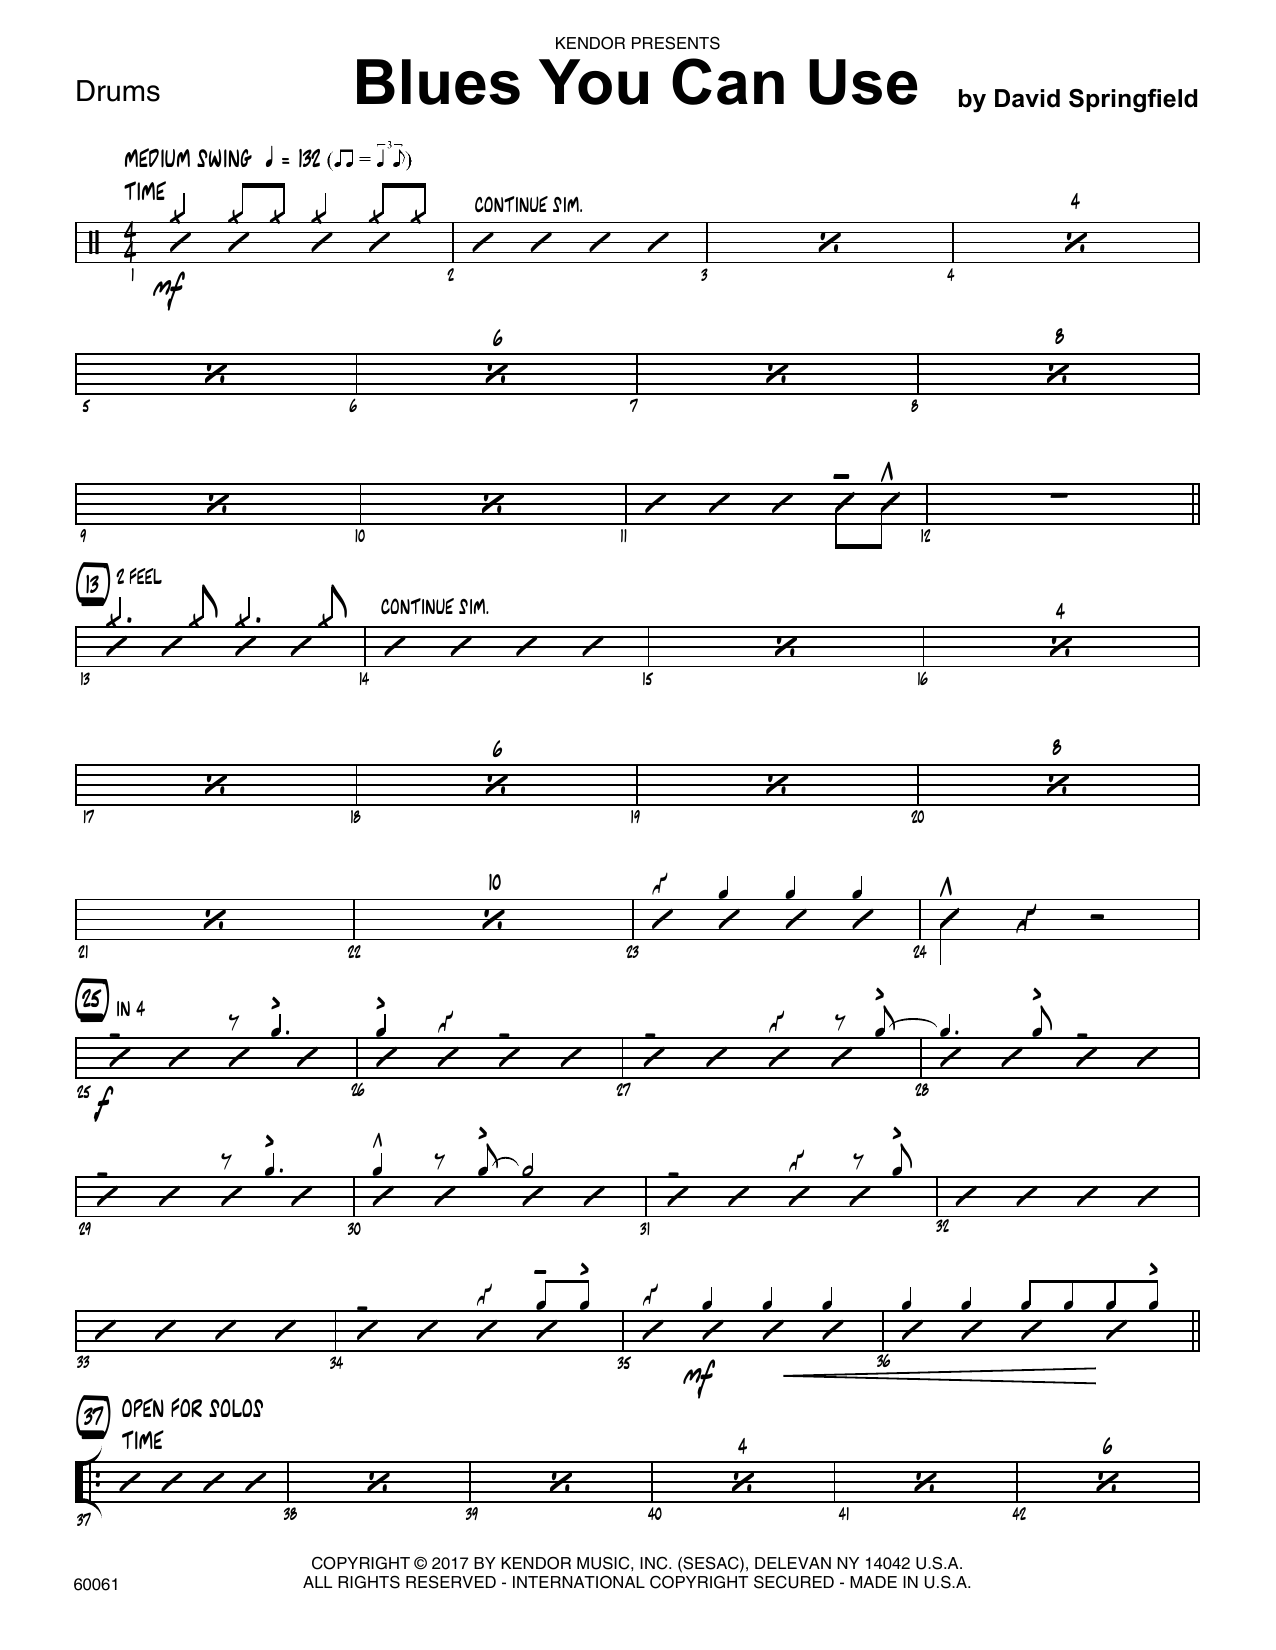 Download David Springfield Blues You Can Use - Drum Set Sheet Music